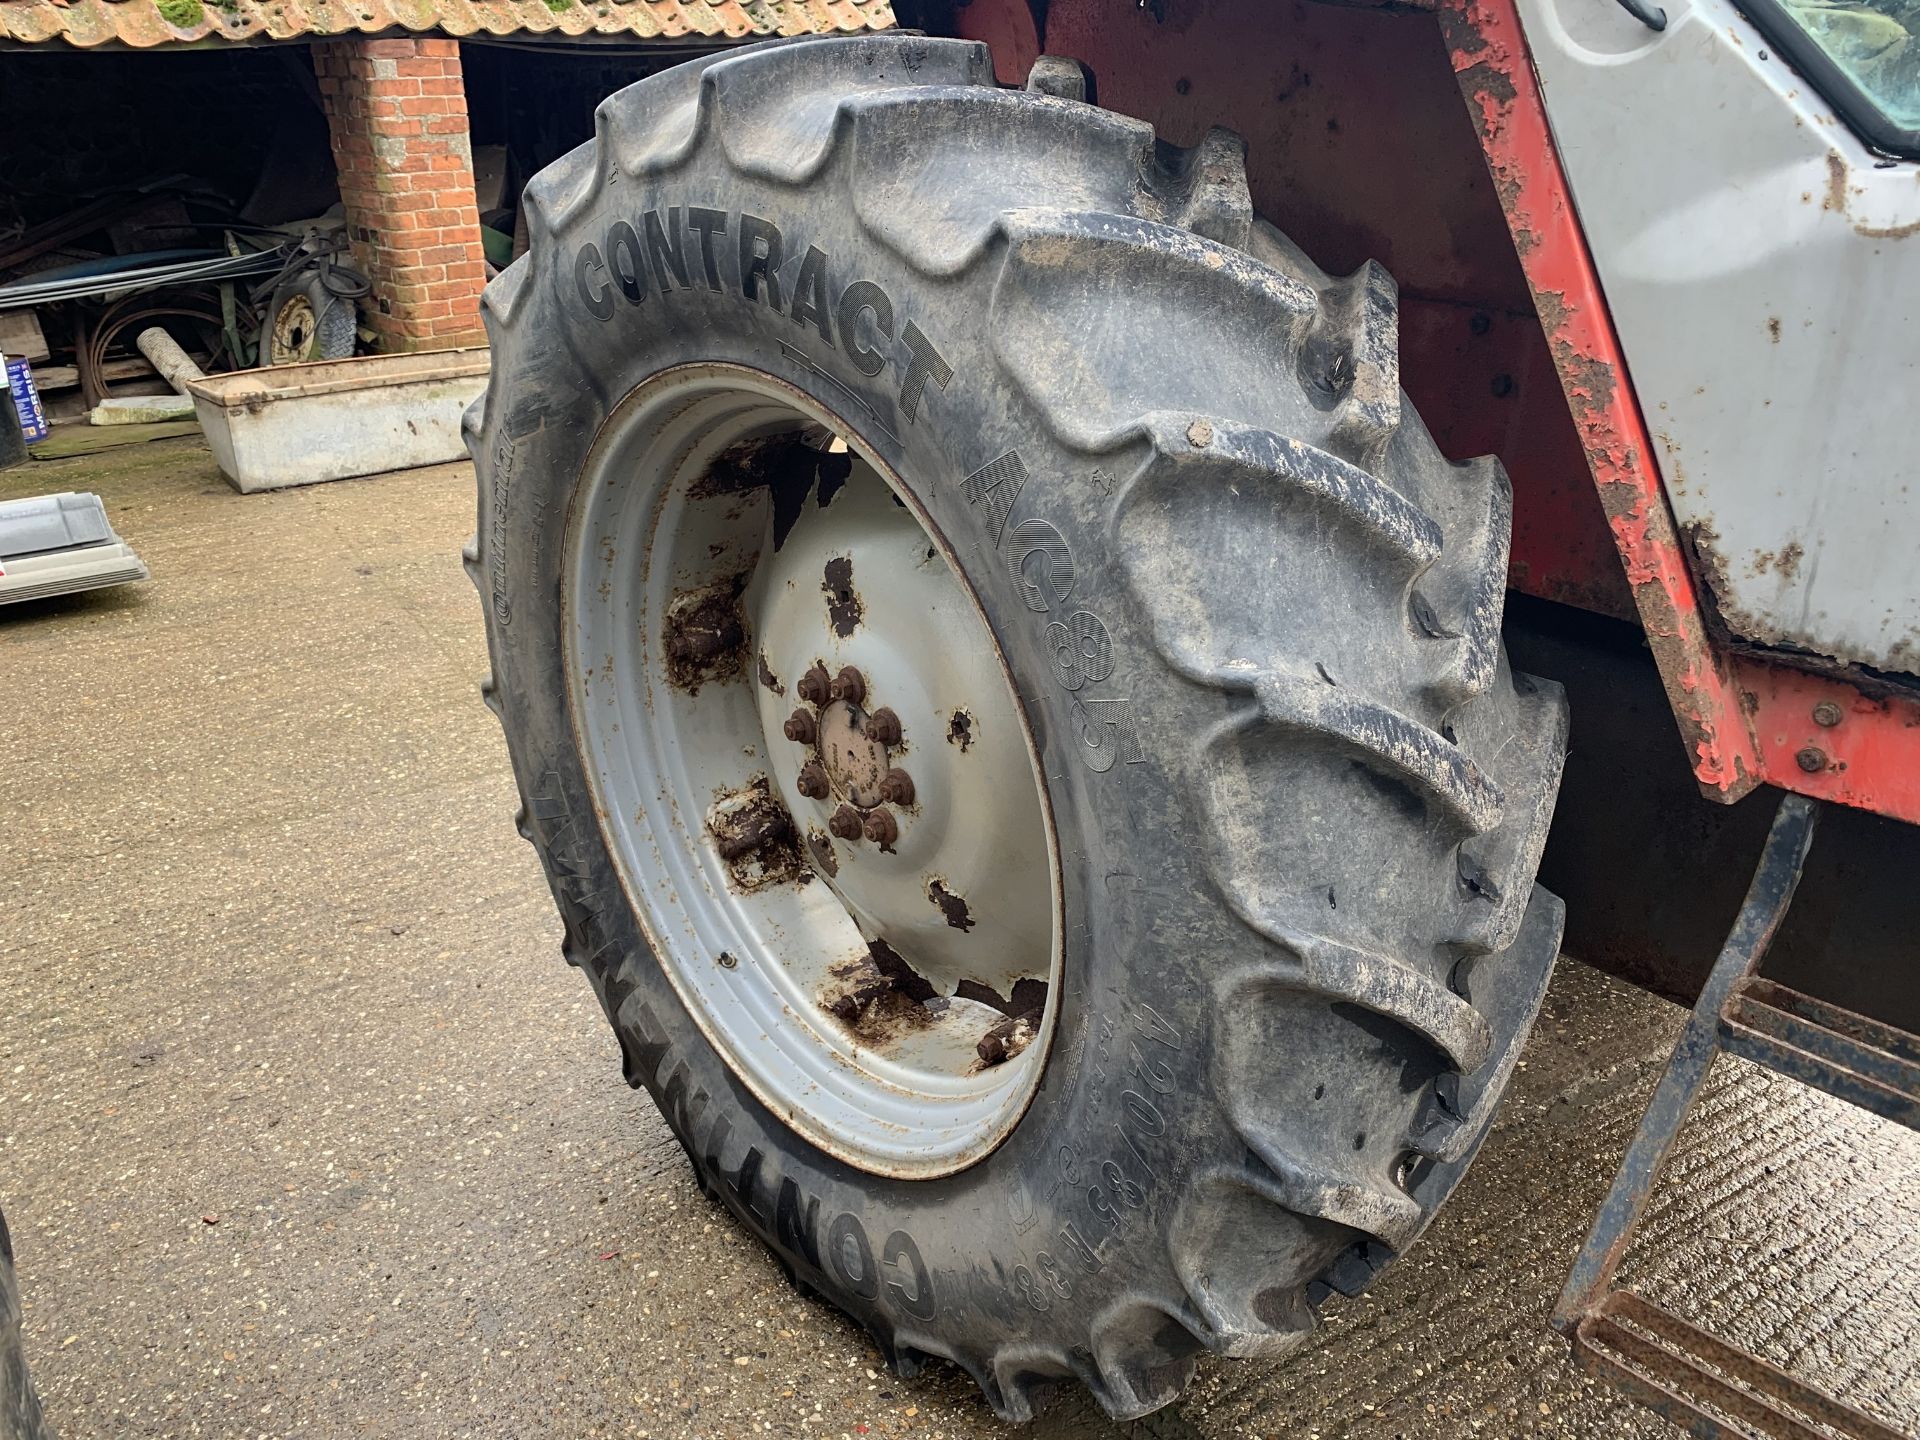 1985 Massey Ferguson 699 2wd tractor, C216 CAT, 7992 hours, runner, 420/85R38 rear tyres with - Image 2 of 7